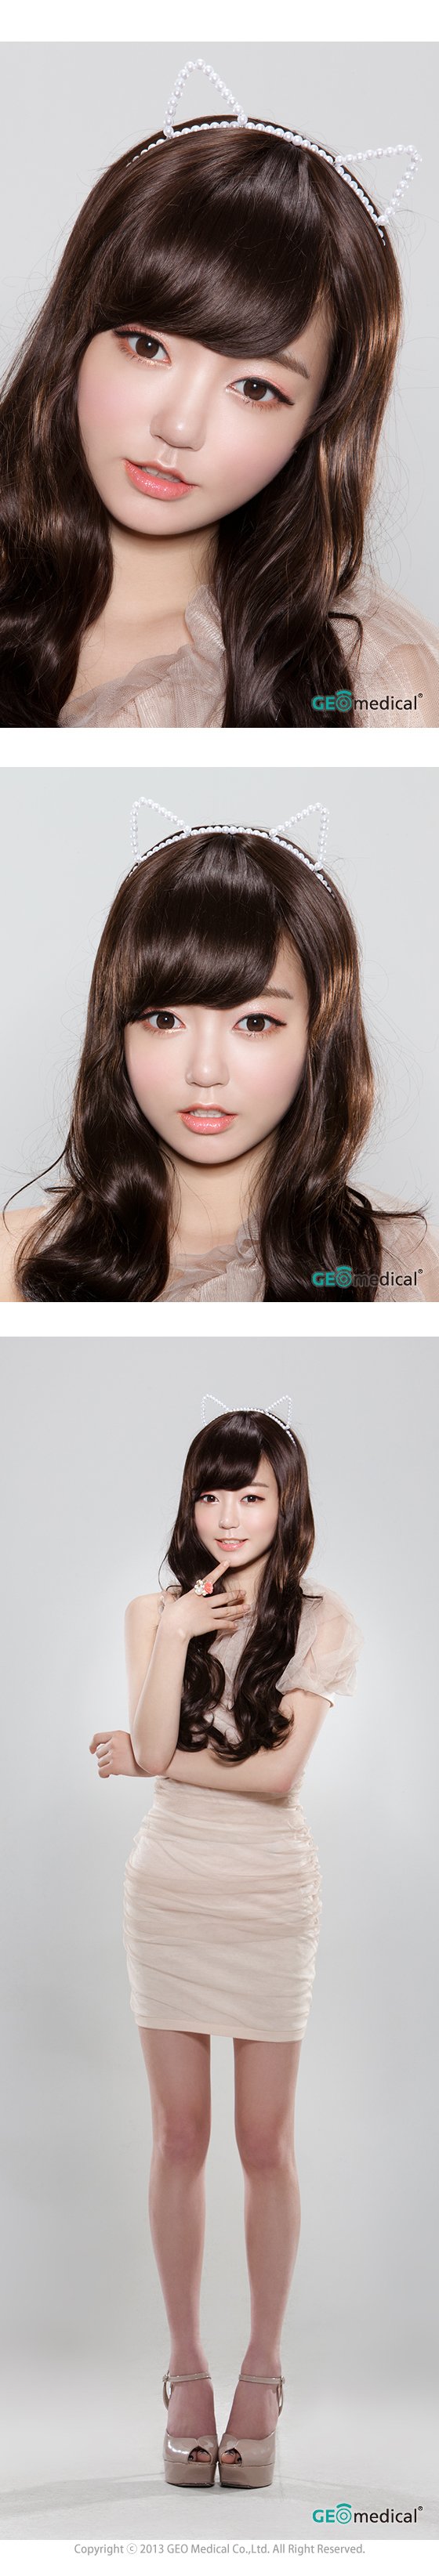 Geo HoliCat Lovely Cat Choco Circle Lenses (Colored Contacts)